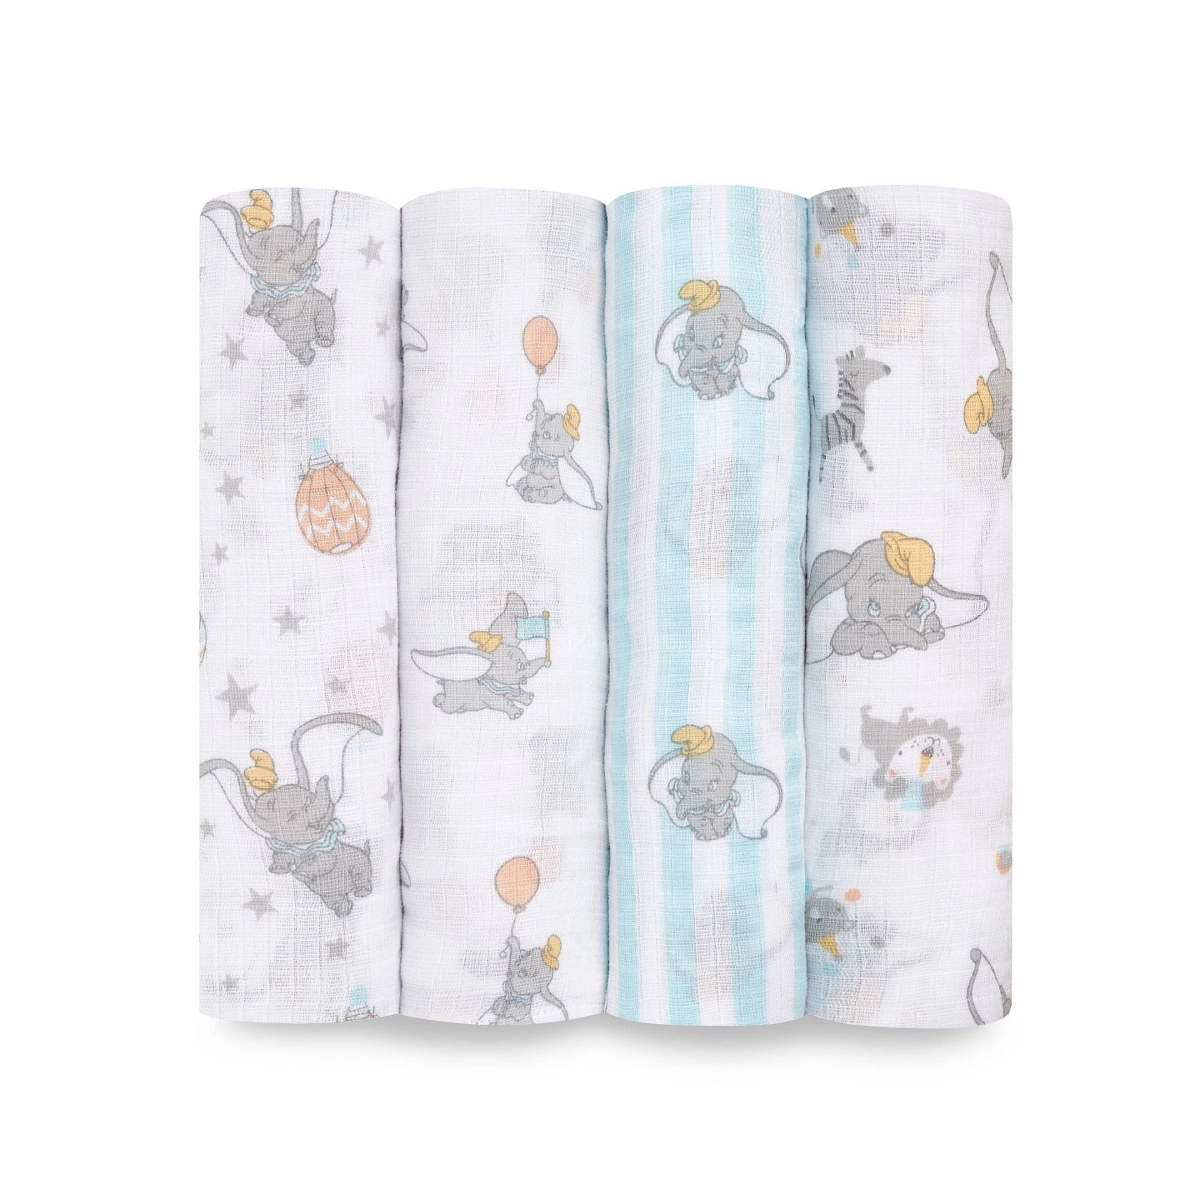 Aden + Anais Pack of 4 Essentials Cotton Muslin Swaddle Blanket